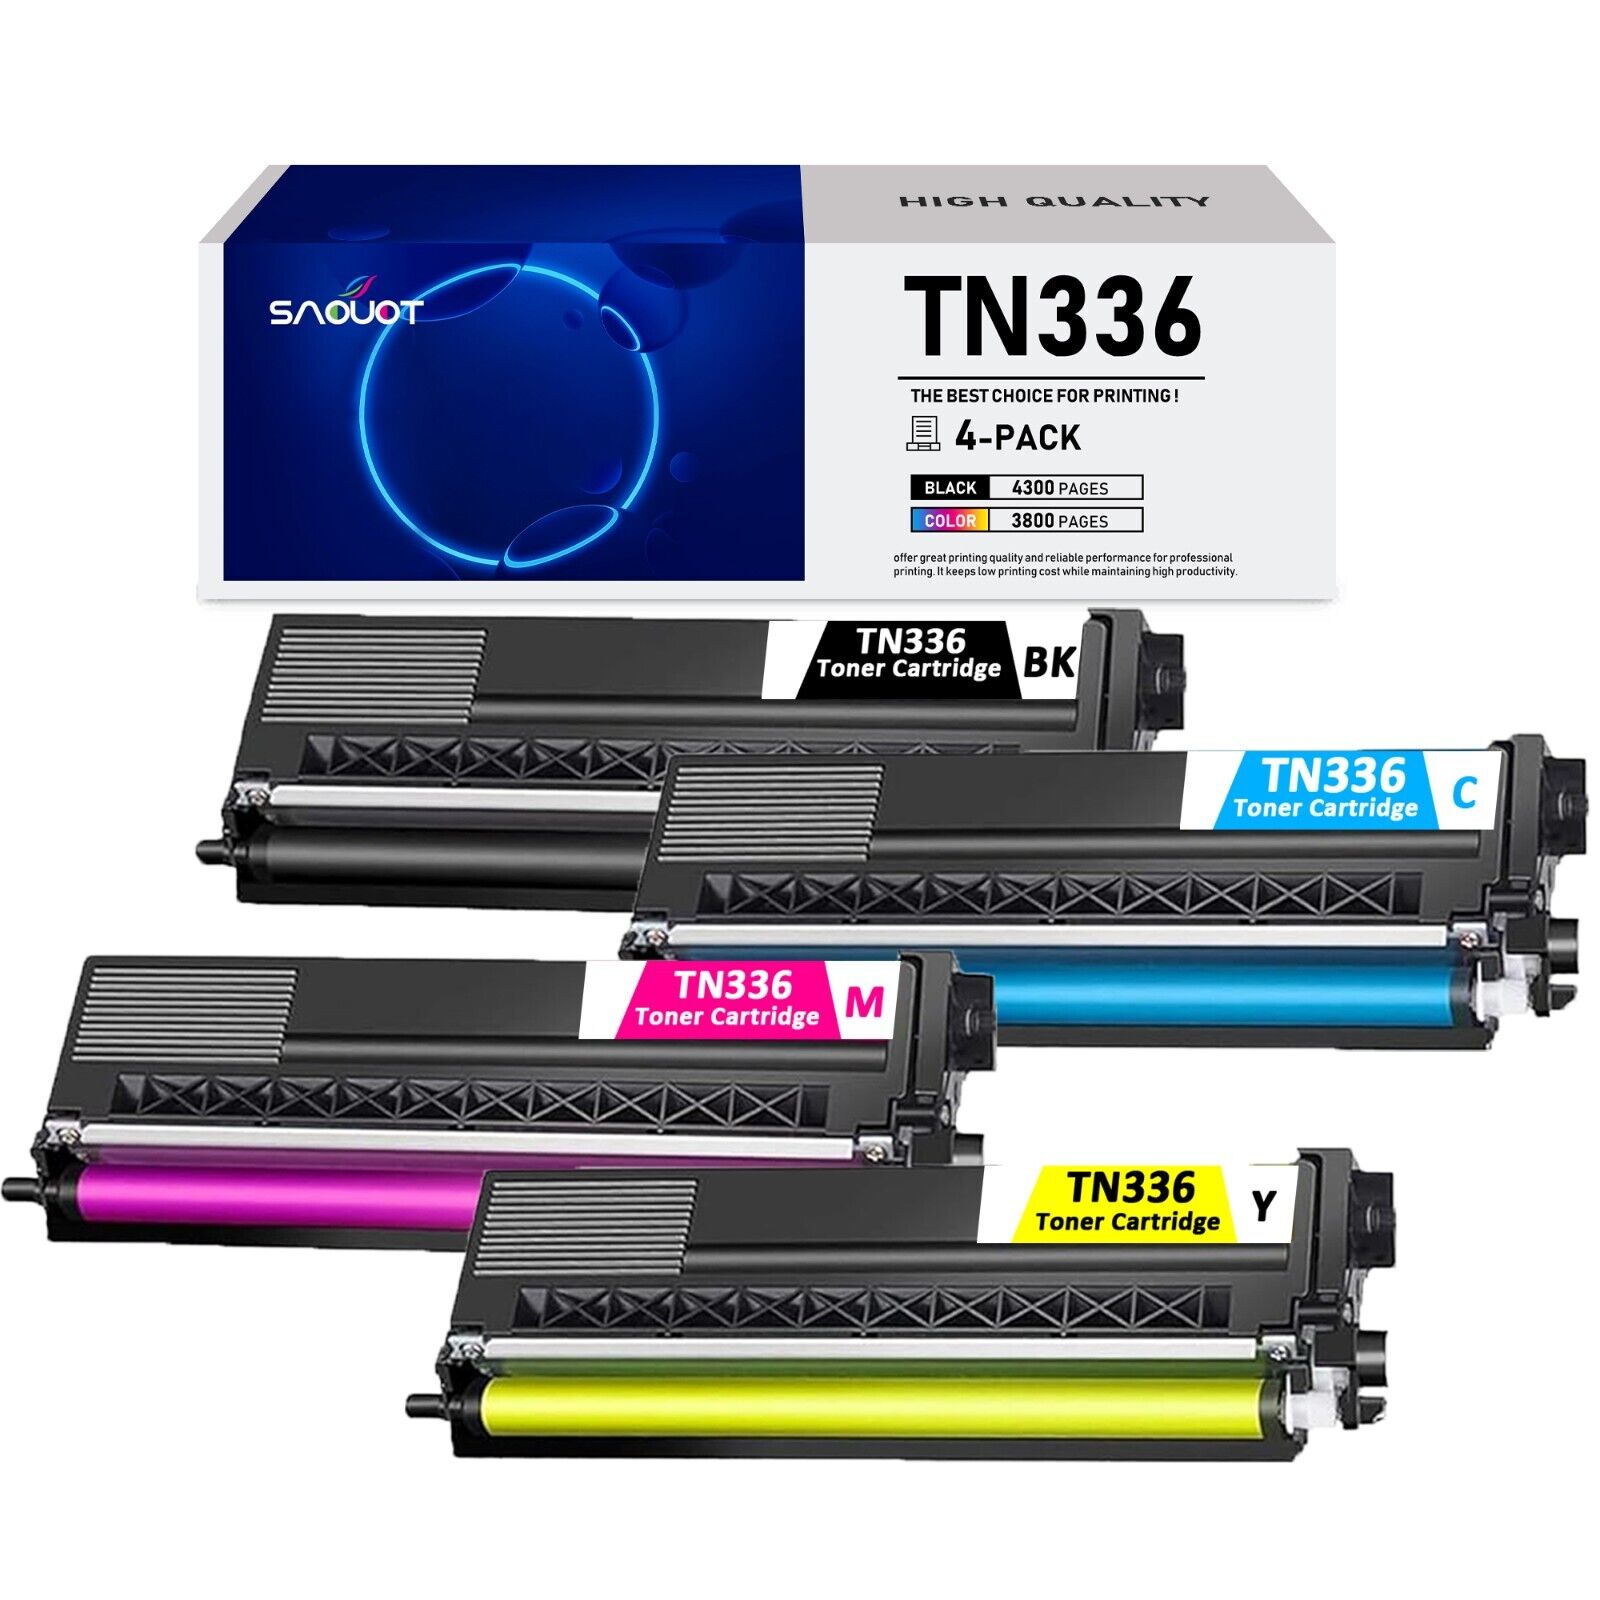 TN336 Toner Cartridges Replacement for Brother HL-L8350CDW MFC-L8850CDW